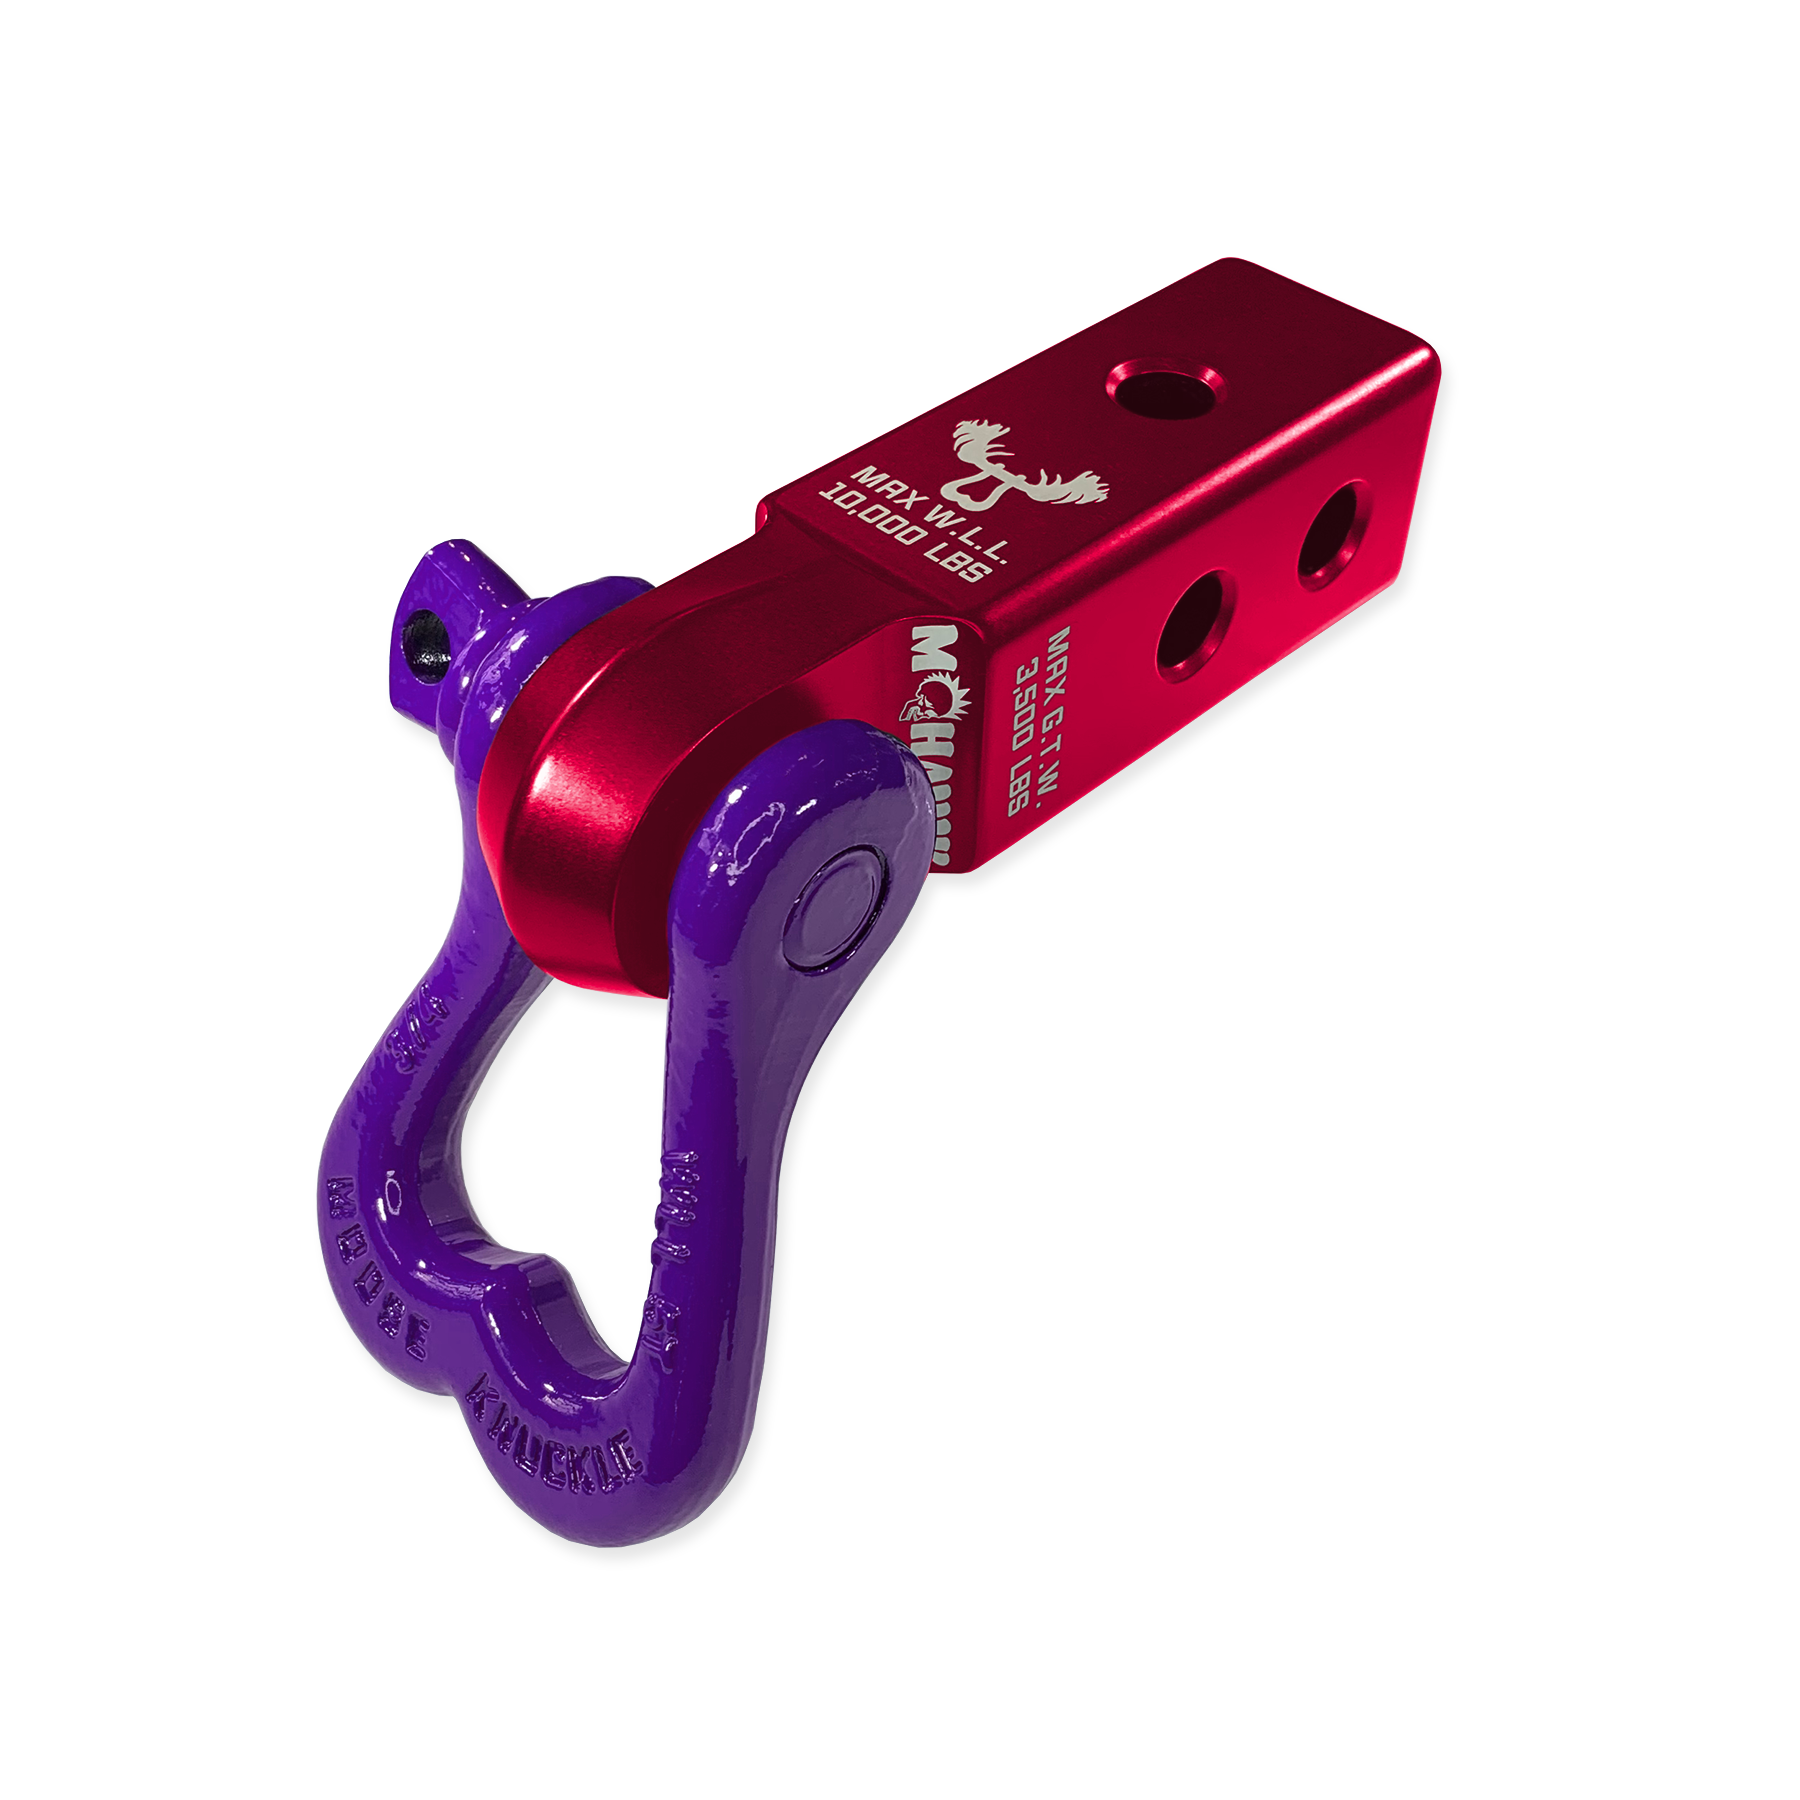 Moose Knuckle Offroad XL Grape Escape 3/4" Purple D-Ring Shackle and Red Rum Mohawk 2.0 Shackle Receiver Combo for off-road vehicle recovery and towing. 